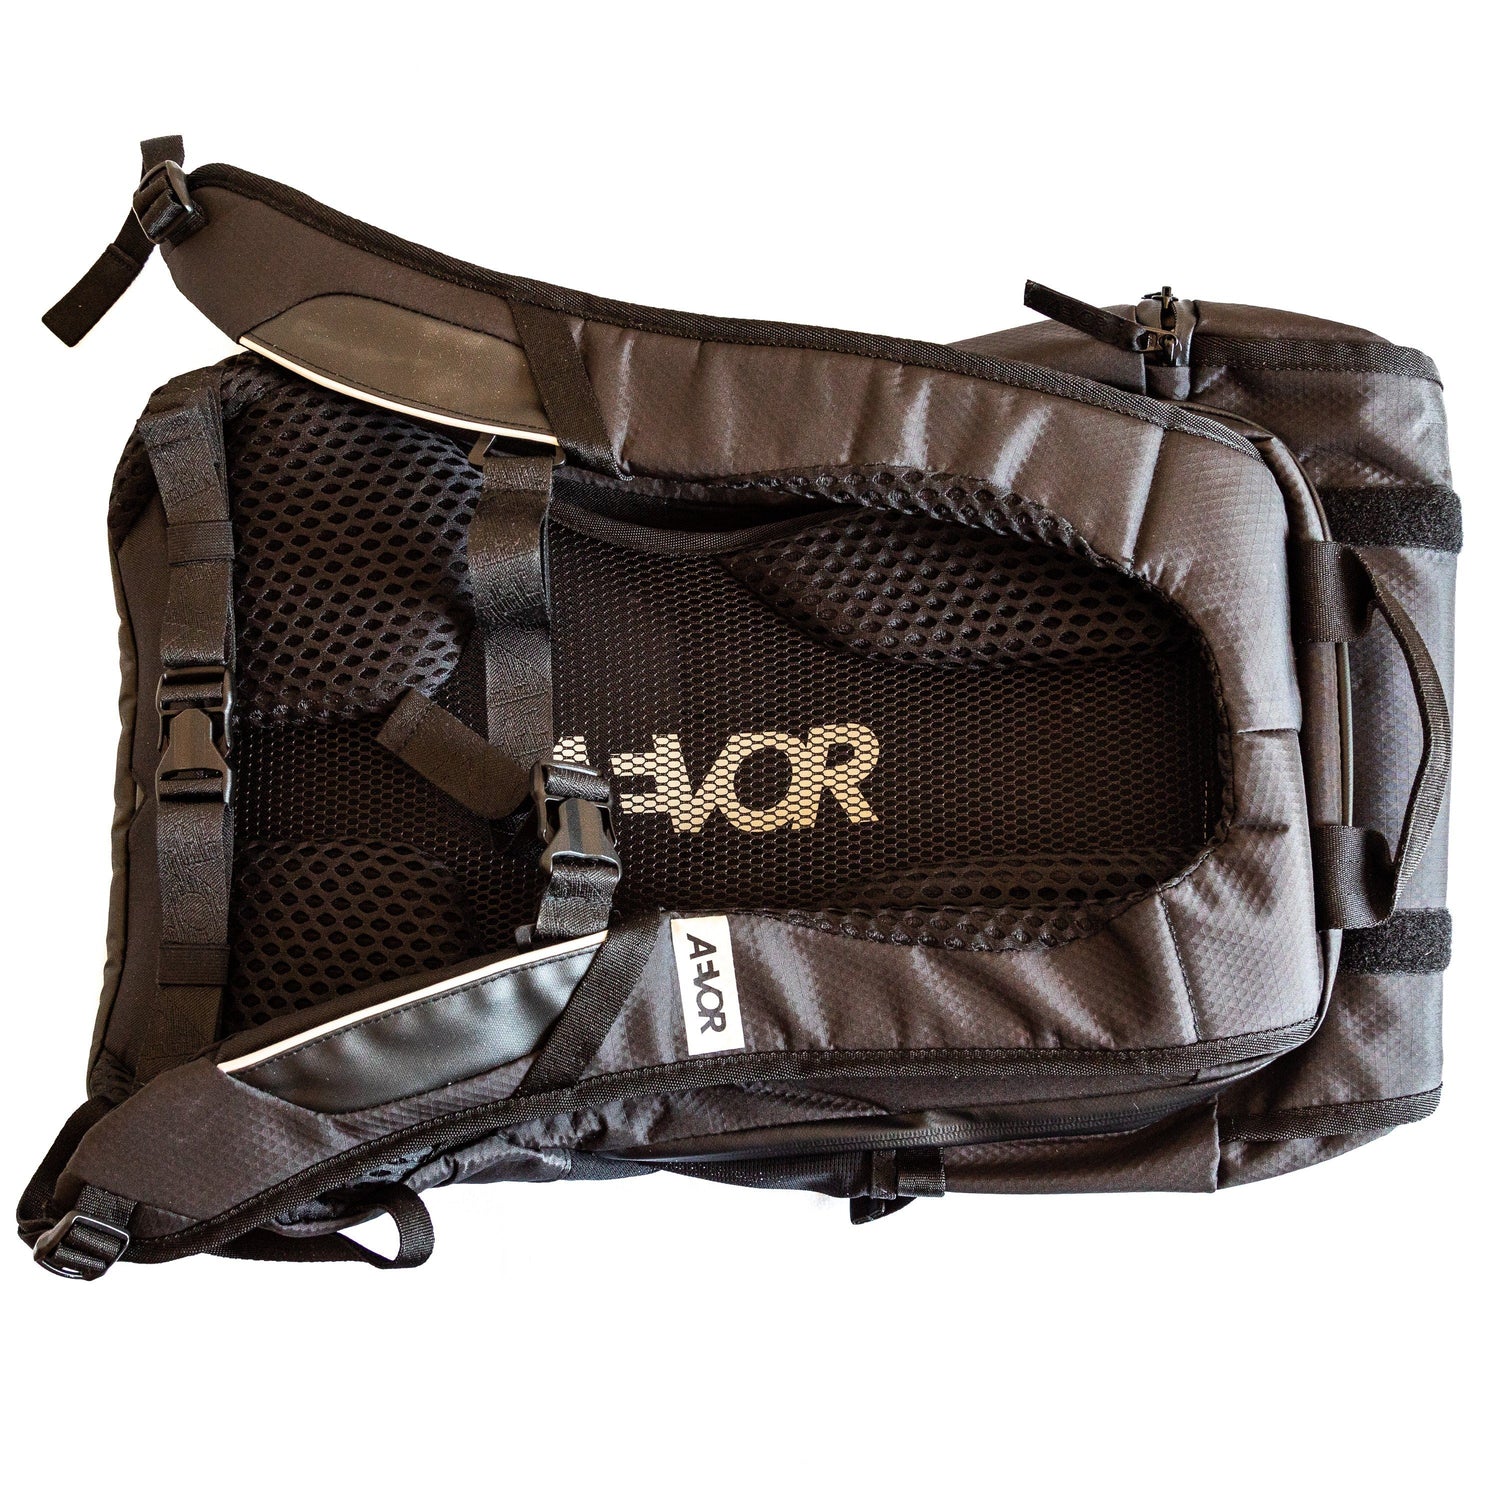 Aevor Bike Pack Proof - Made from Recycled PET-bottles Black Bags